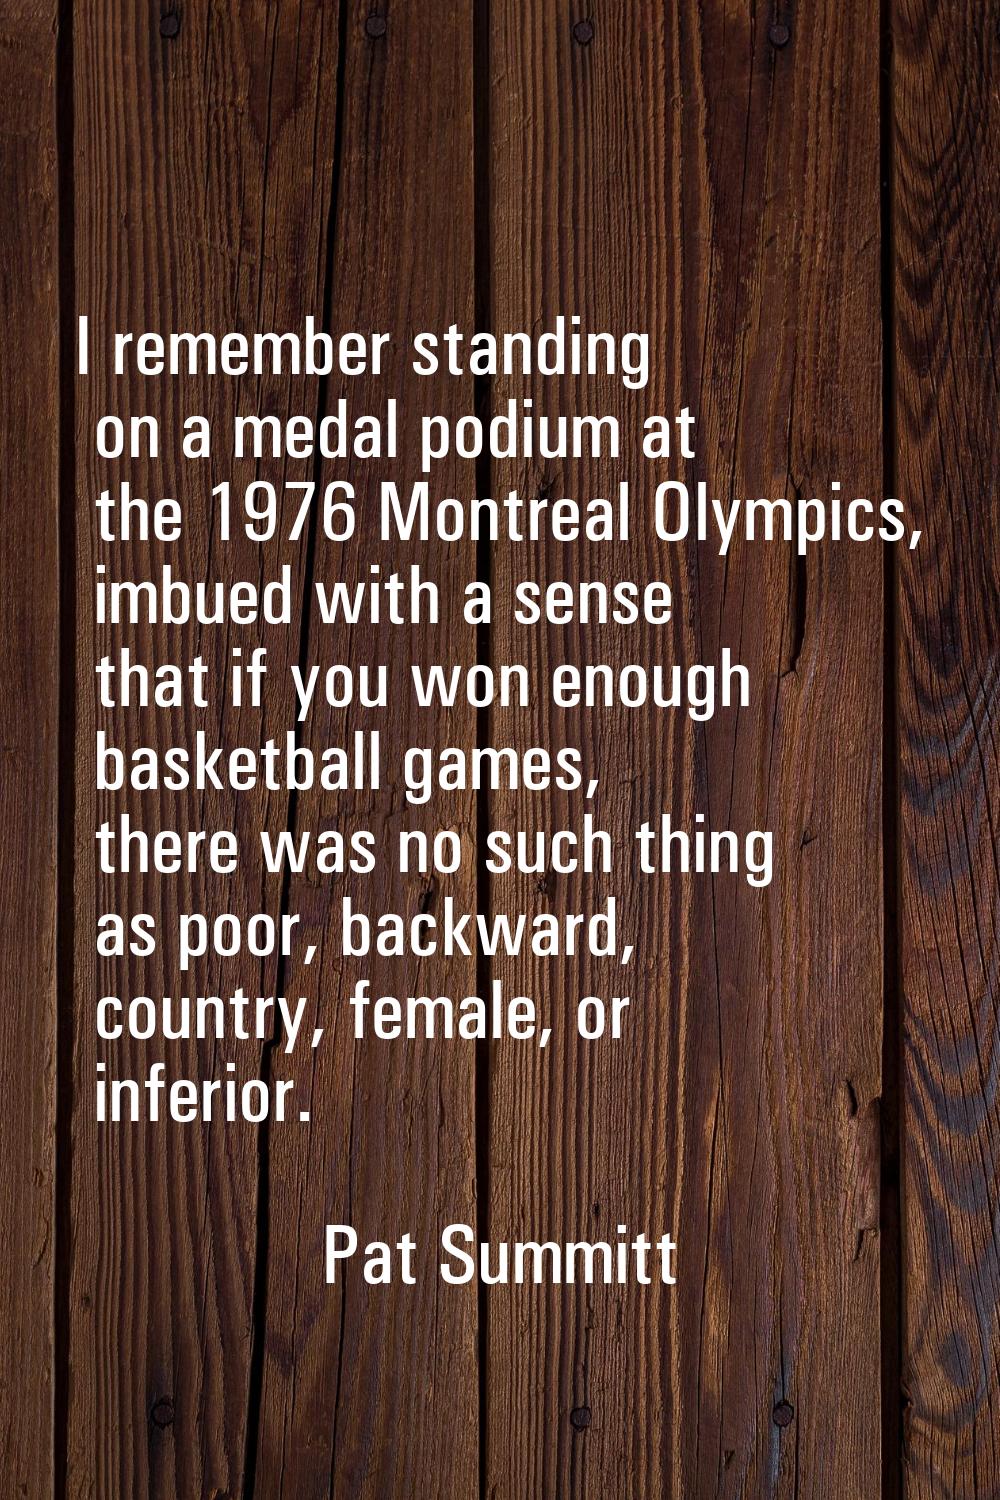 I remember standing on a medal podium at the 1976 Montreal Olympics, imbued with a sense that if yo